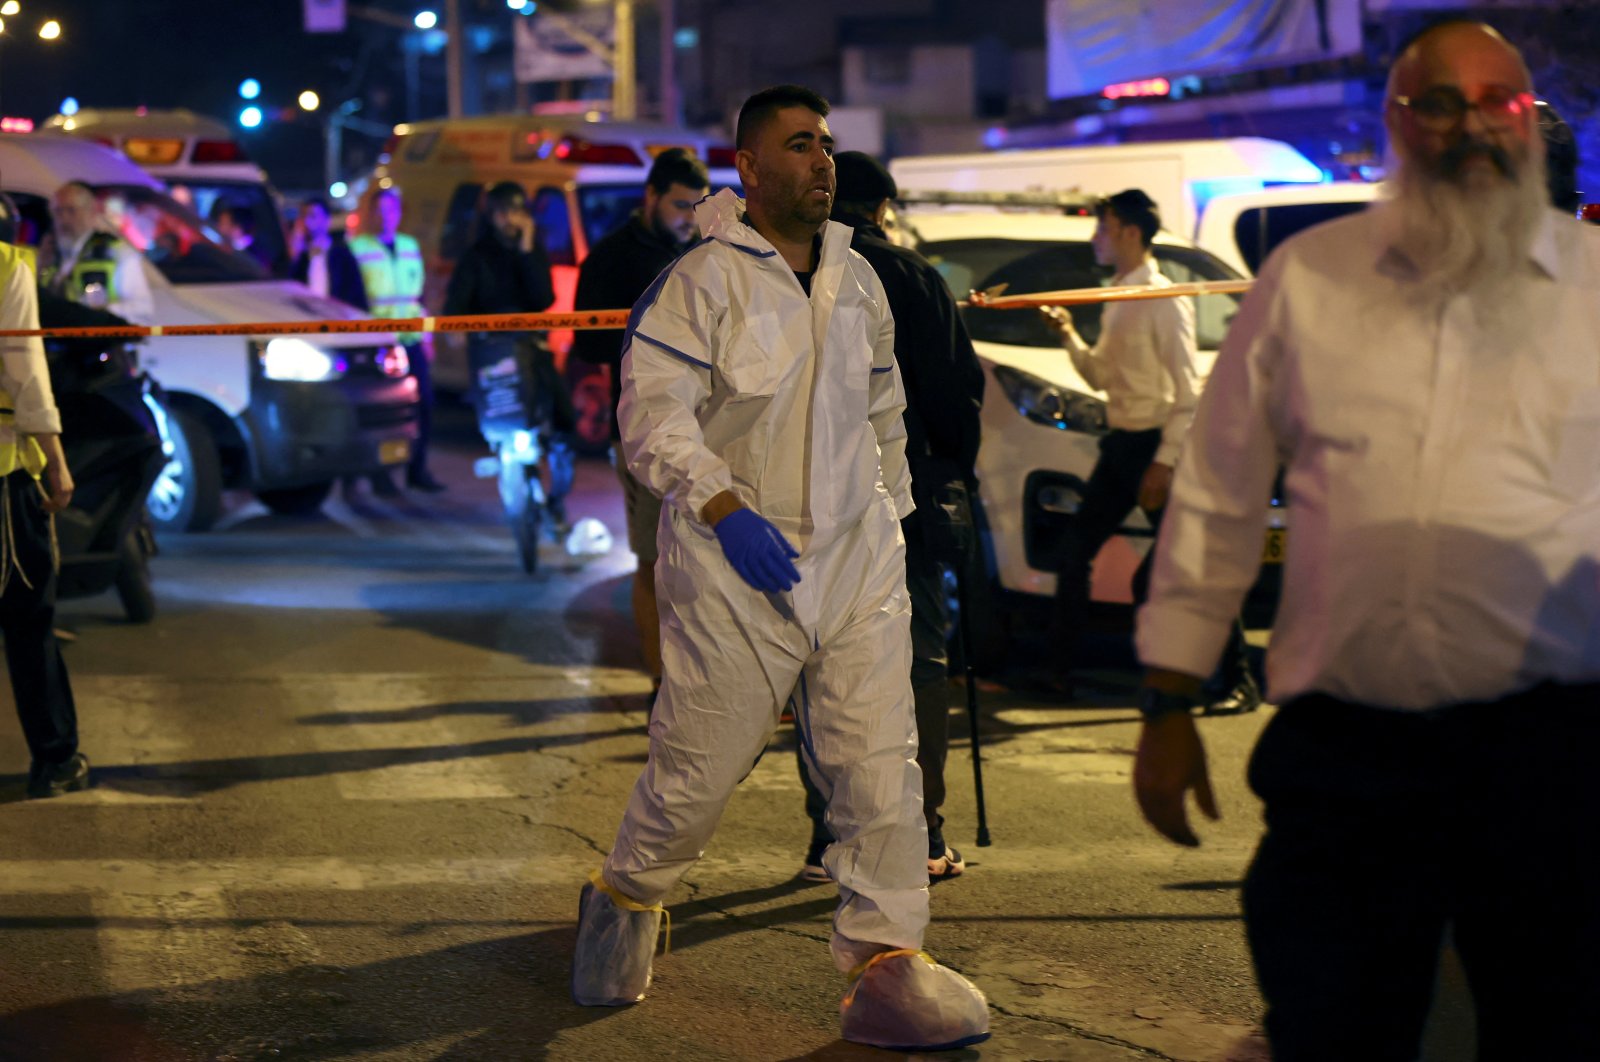 Israeli police forensics experts work at the scene of an attack in which people were killed by a gunman on a main street in Bnei Brak, near Tel Aviv, Israel, March 29, 2022. (Reuters Photo)